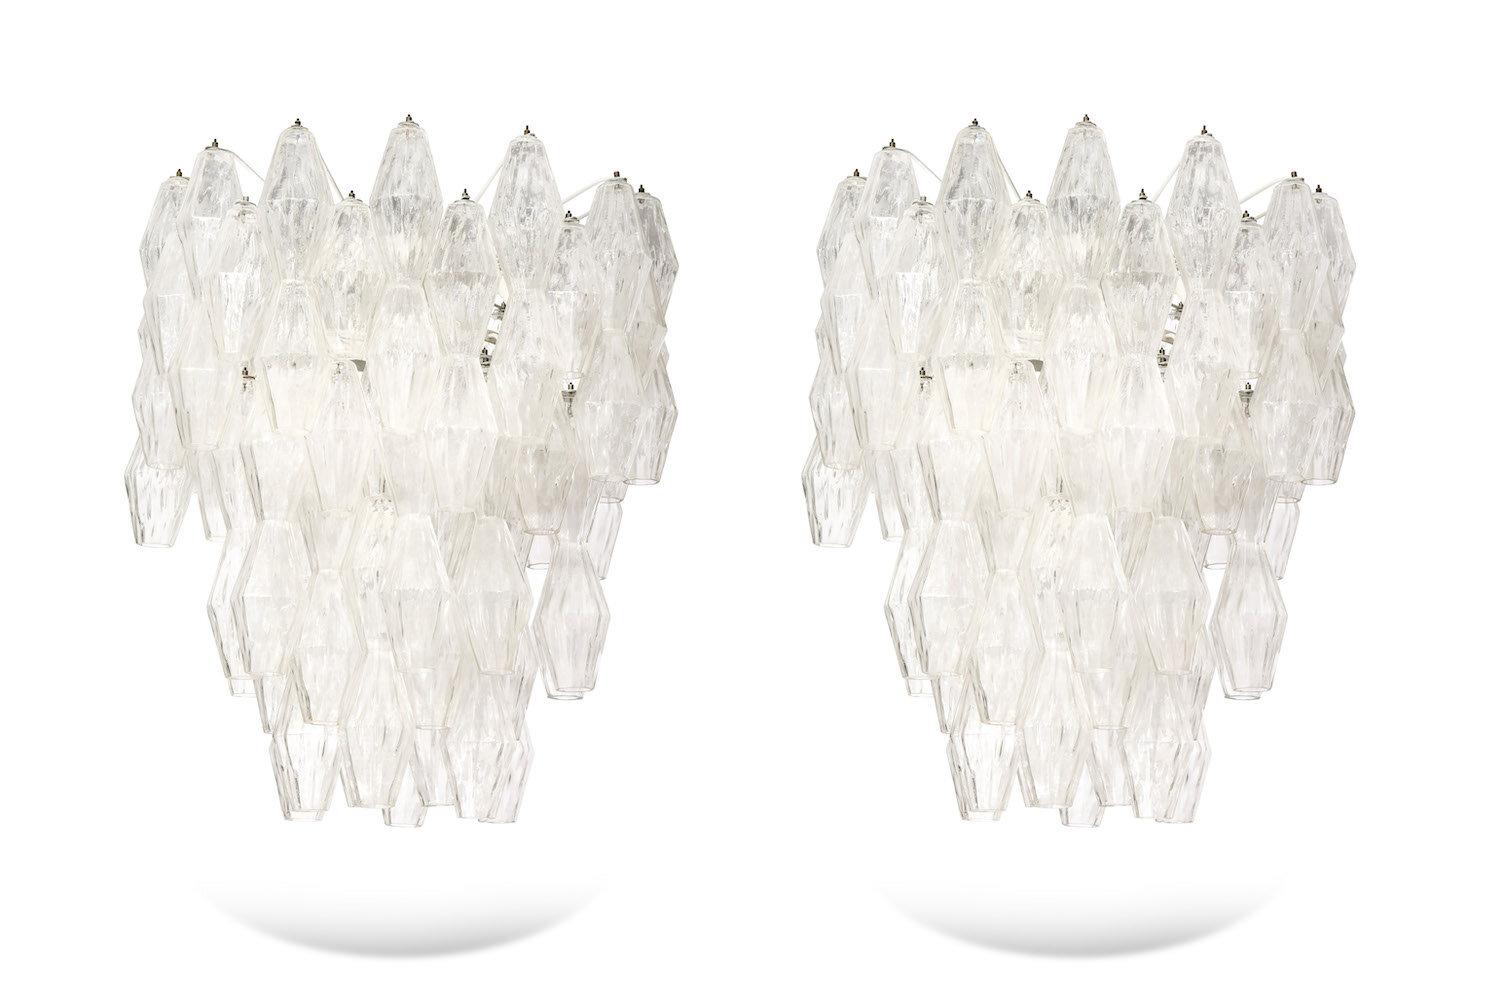 Designed by Paolo Venini and originally introduced in 1957. Beautiful and large fixture with textured blown glass. Abstract diamond forms with faceted sides hanging from multi-armed interior frame, with 14 candelabra sockets. Very elegant. Sold as a